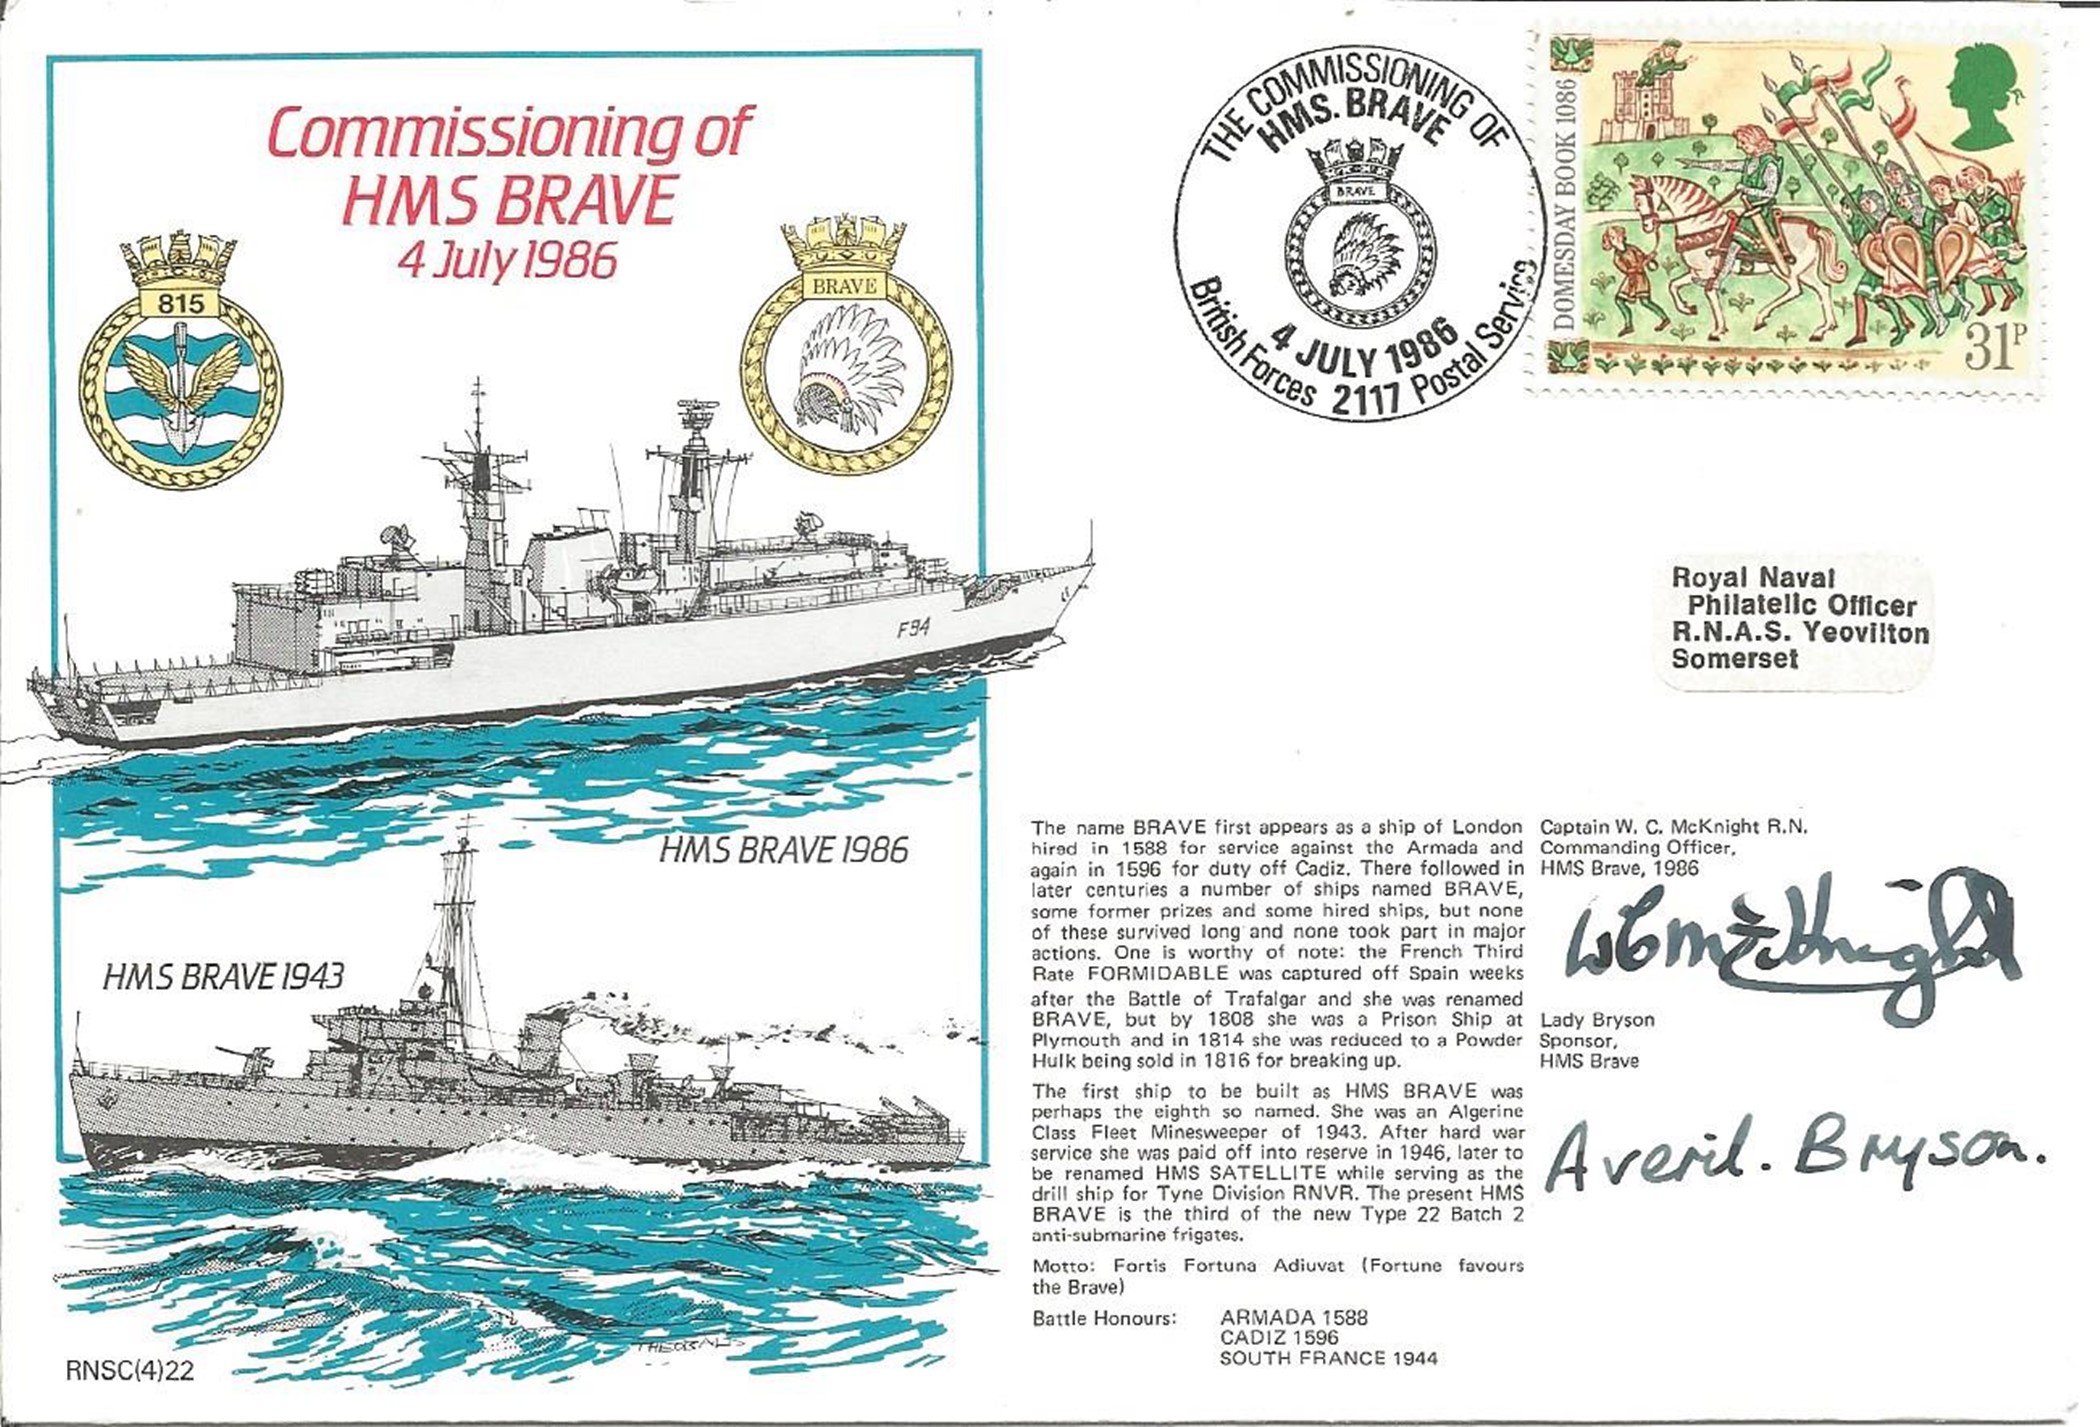 Captain W C McKnight and Lady Bryson Sponsor of HMS Brave signed RNSC(4)22 cover commemorating the